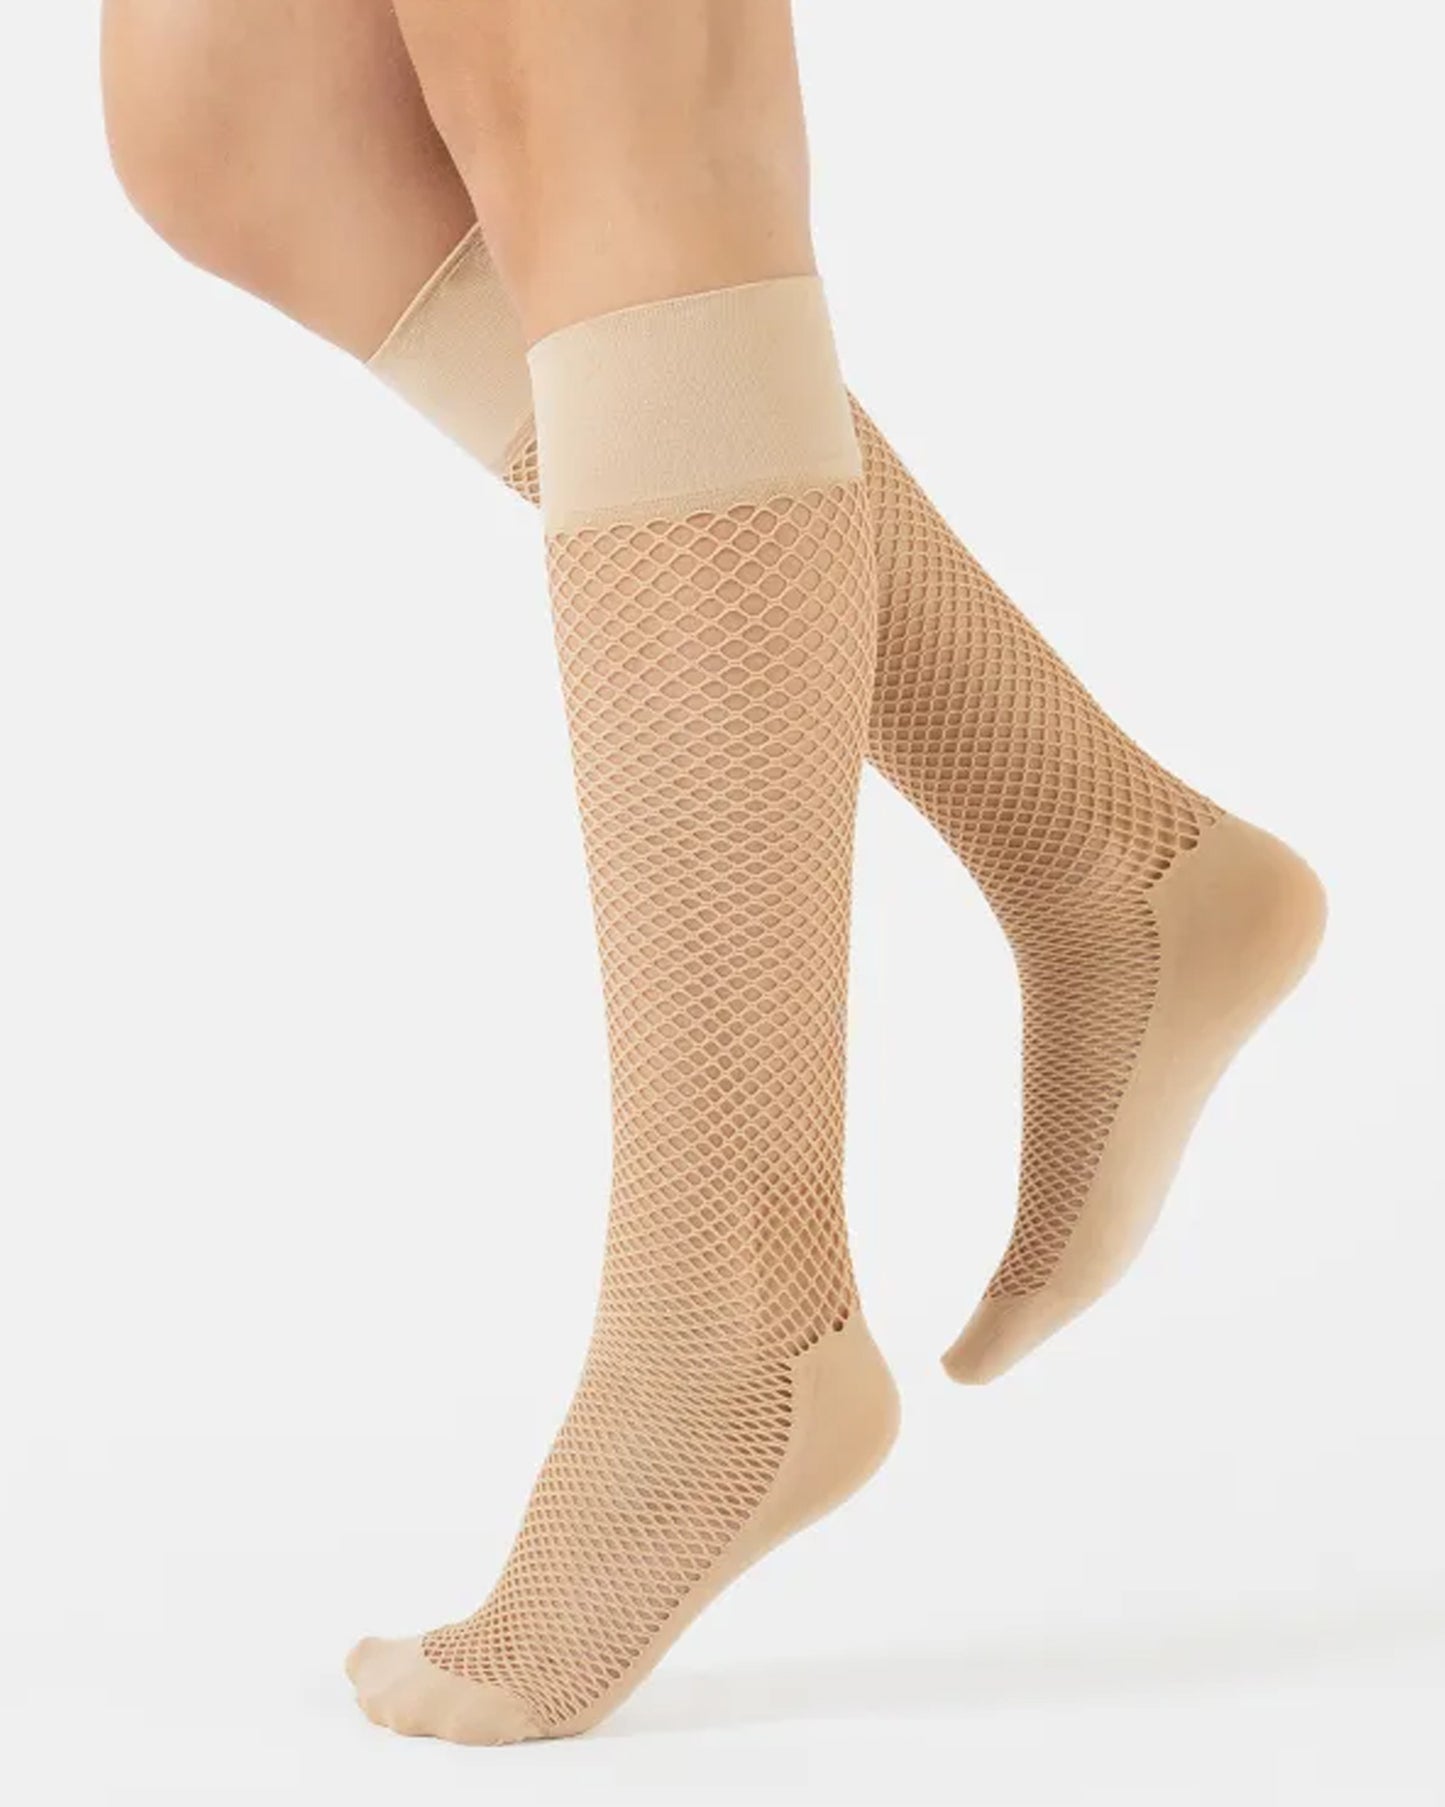 Calzitaly Fishnet Knee-High 2 pack - Light nude open work fishnet knee high socks with a smooth plain opaque built in shoe liner sock and deep elasticated comfort cuff.